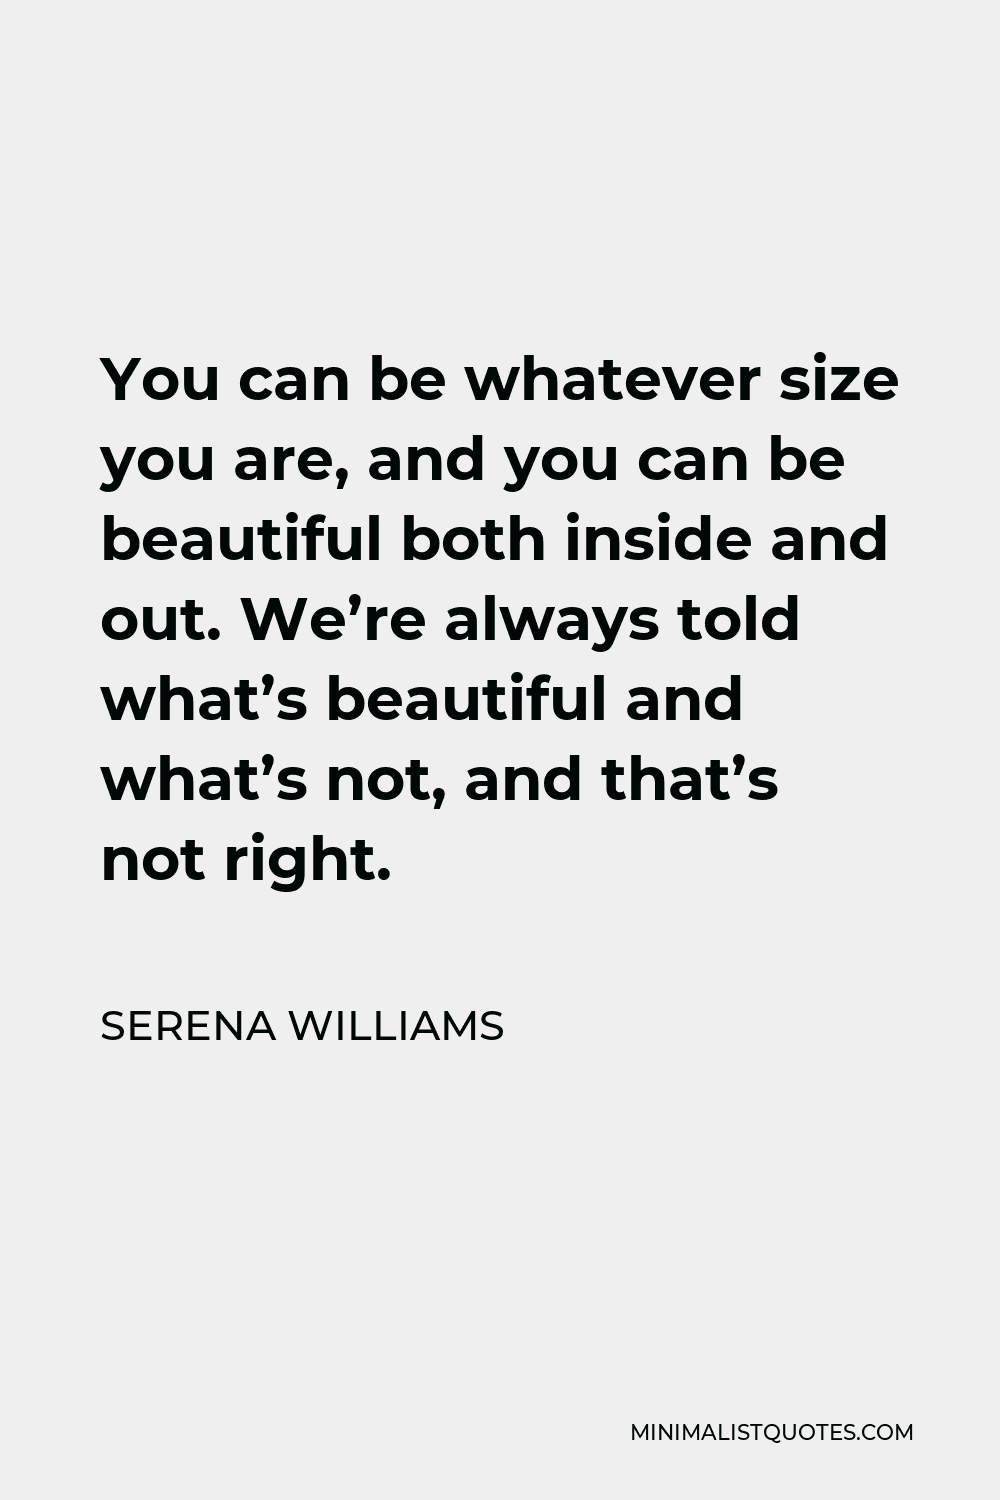 Serena Williams Quote - You can be whatever size you are, and you can be beautiful both inside and out. We’re always told what’s beautiful and what’s not, and that’s not right.